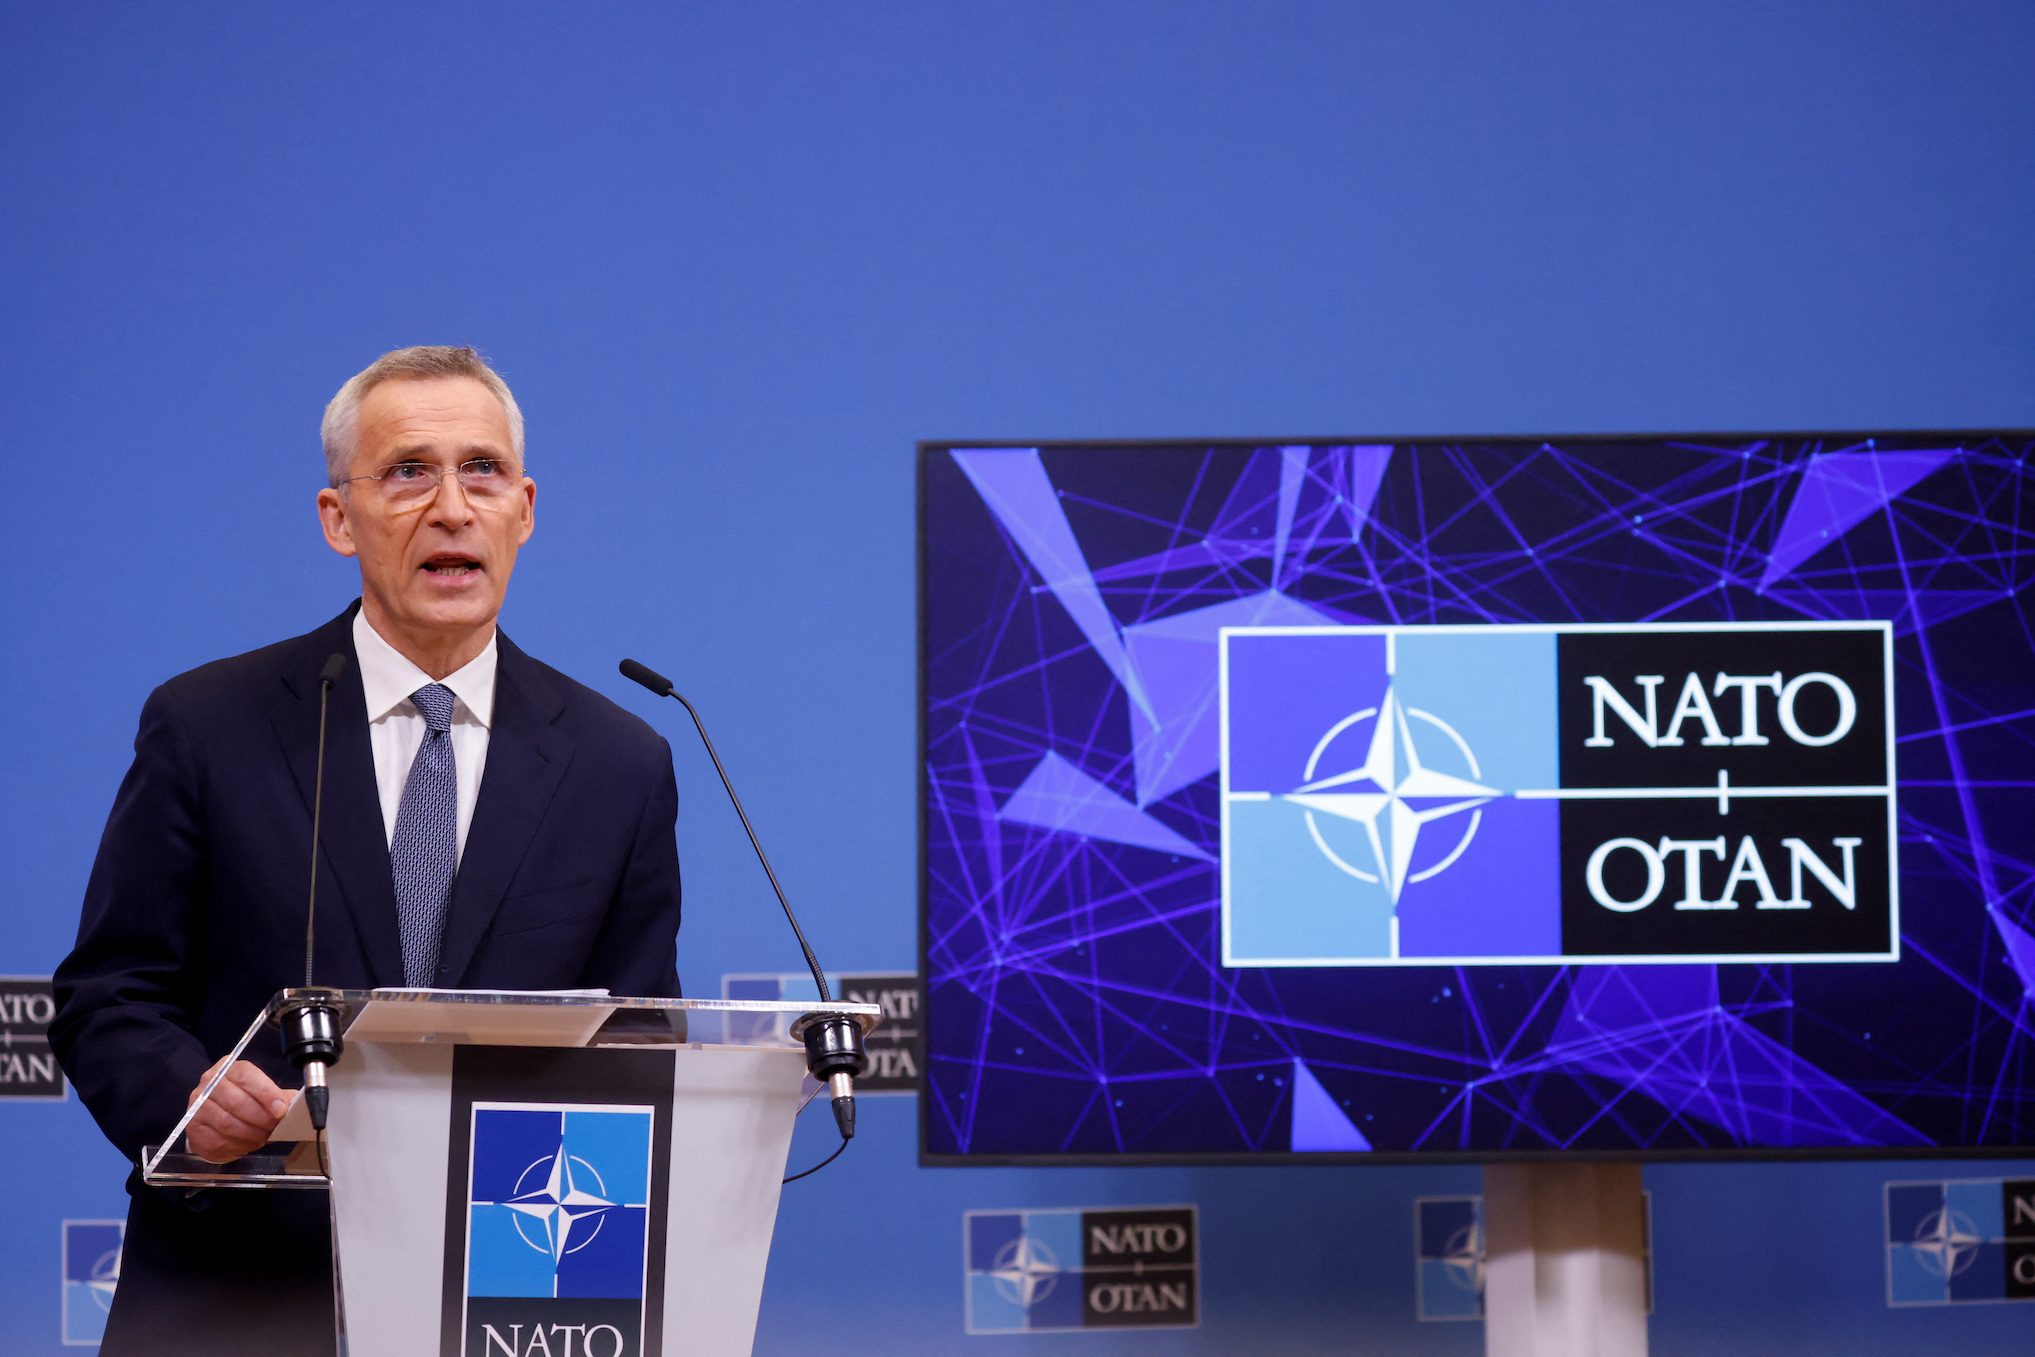 Finland to join NATO on Tuesday; Sweden still waiting